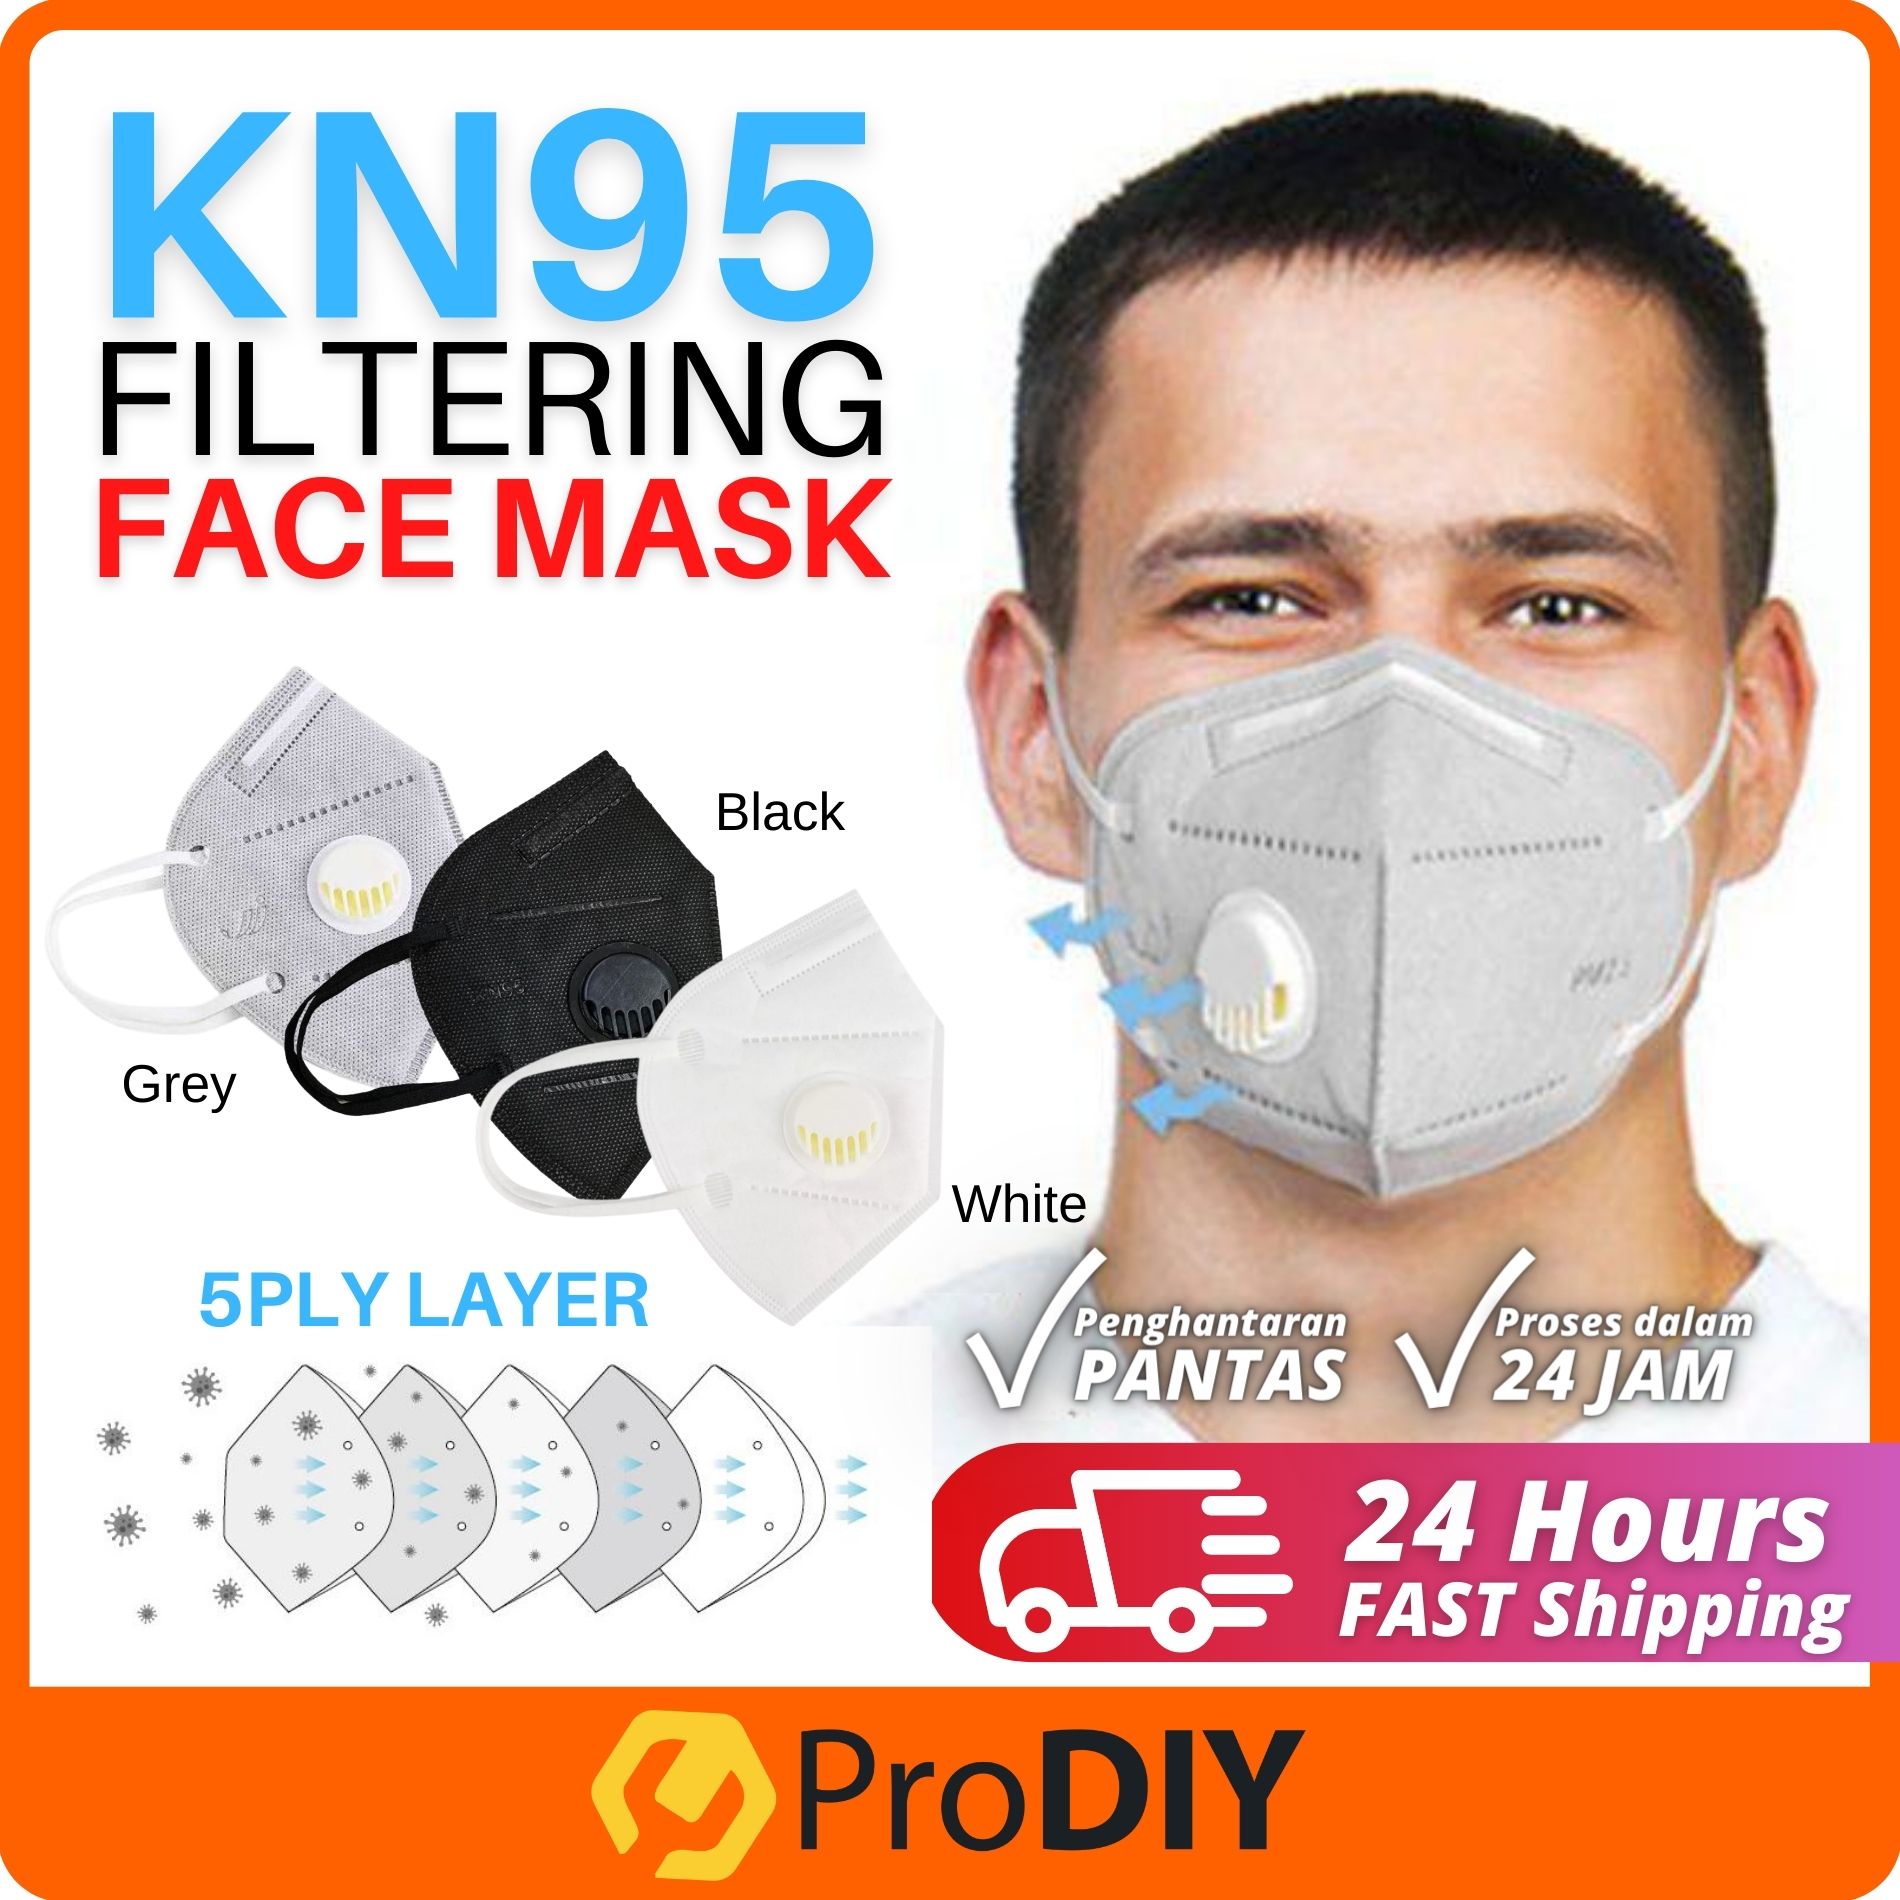 Mask malaysia kn95 How to